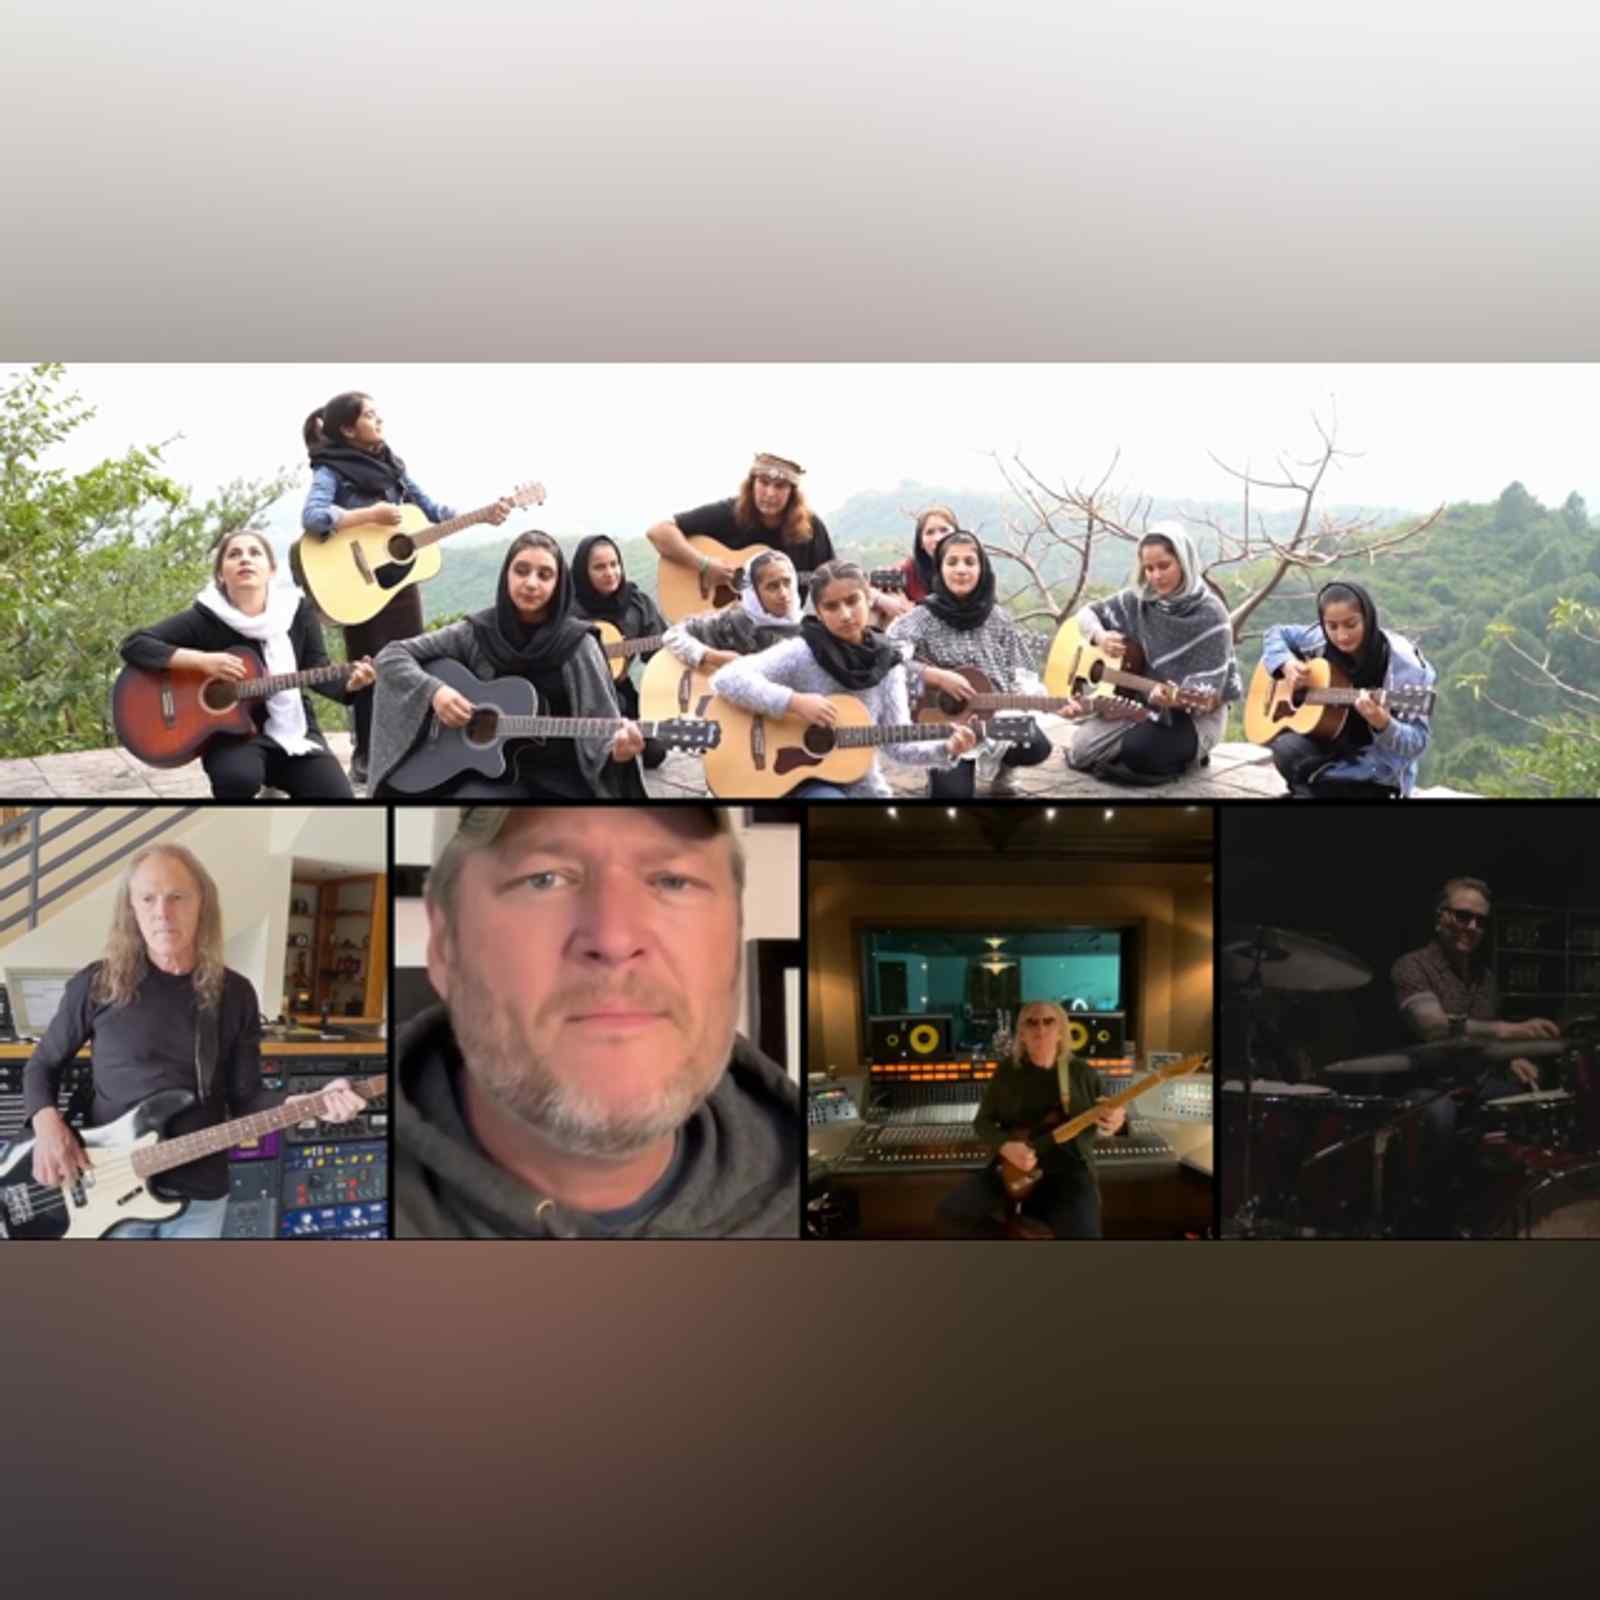 THE MIRACULOUS LOVE KIDS PRESENT ‘I WON'T BACK DOWN’ FEATURING BLAKE SHELTON, JOE WALSH, TIMOTHY B. SCHMIT & MATT SORUM IN SUPPORT OF AFGHAN GIRLS MUSIC GROUP & THEIR QUEST FOR NEW HOME